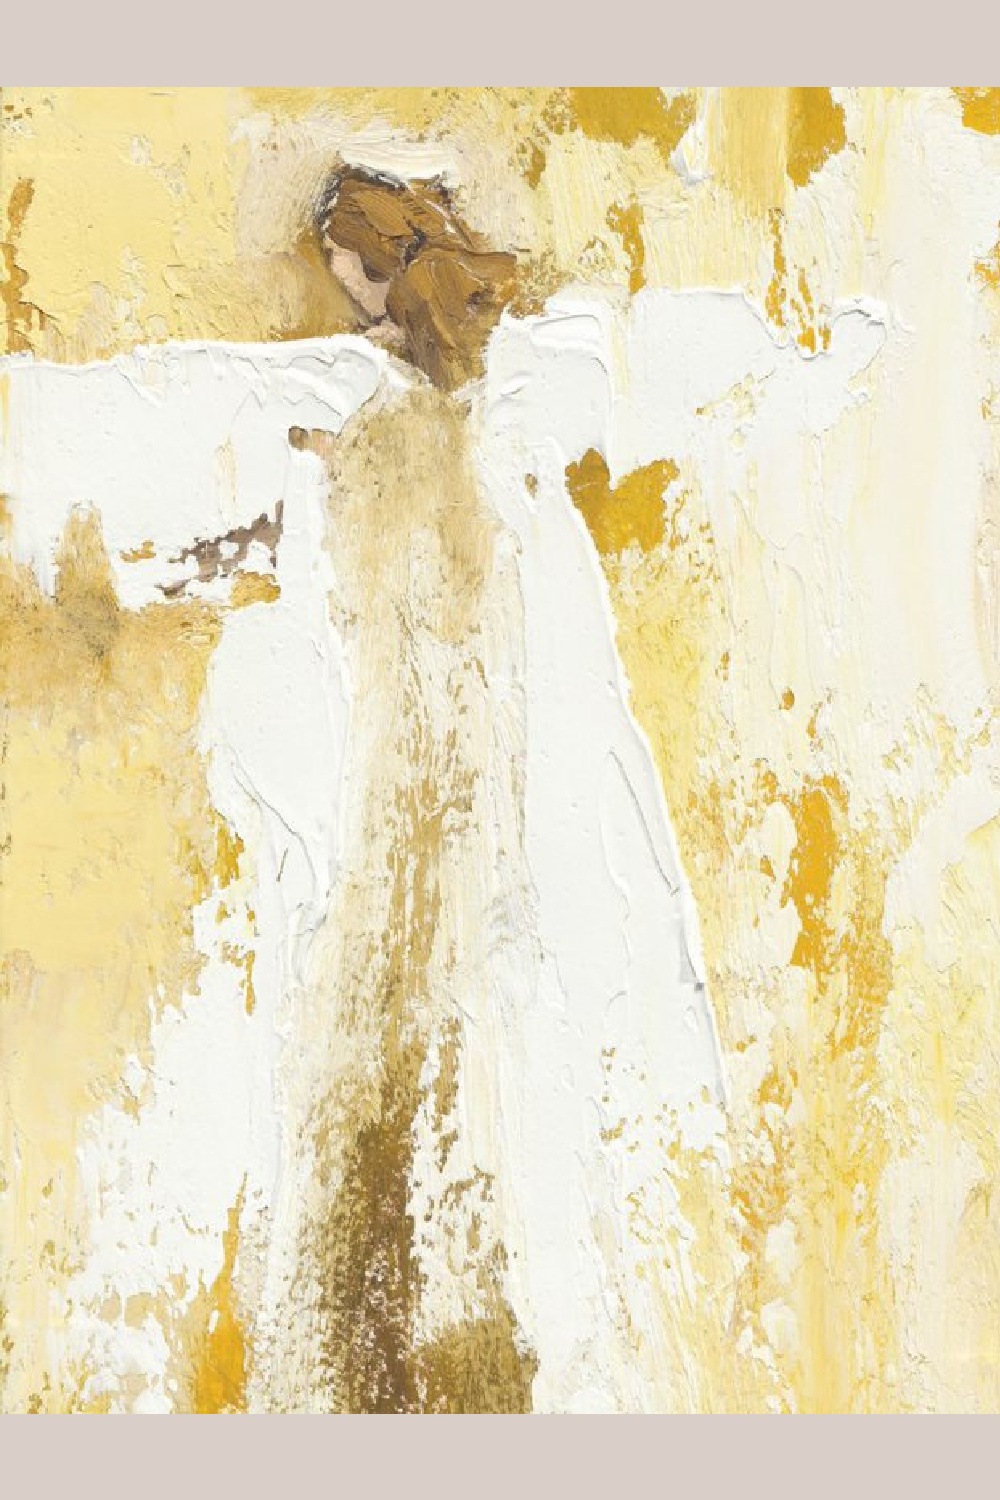 Angel painting with yellow by Anne Neilson, author of ENTERTAINING ANGELS. #christianart #angelpaintings